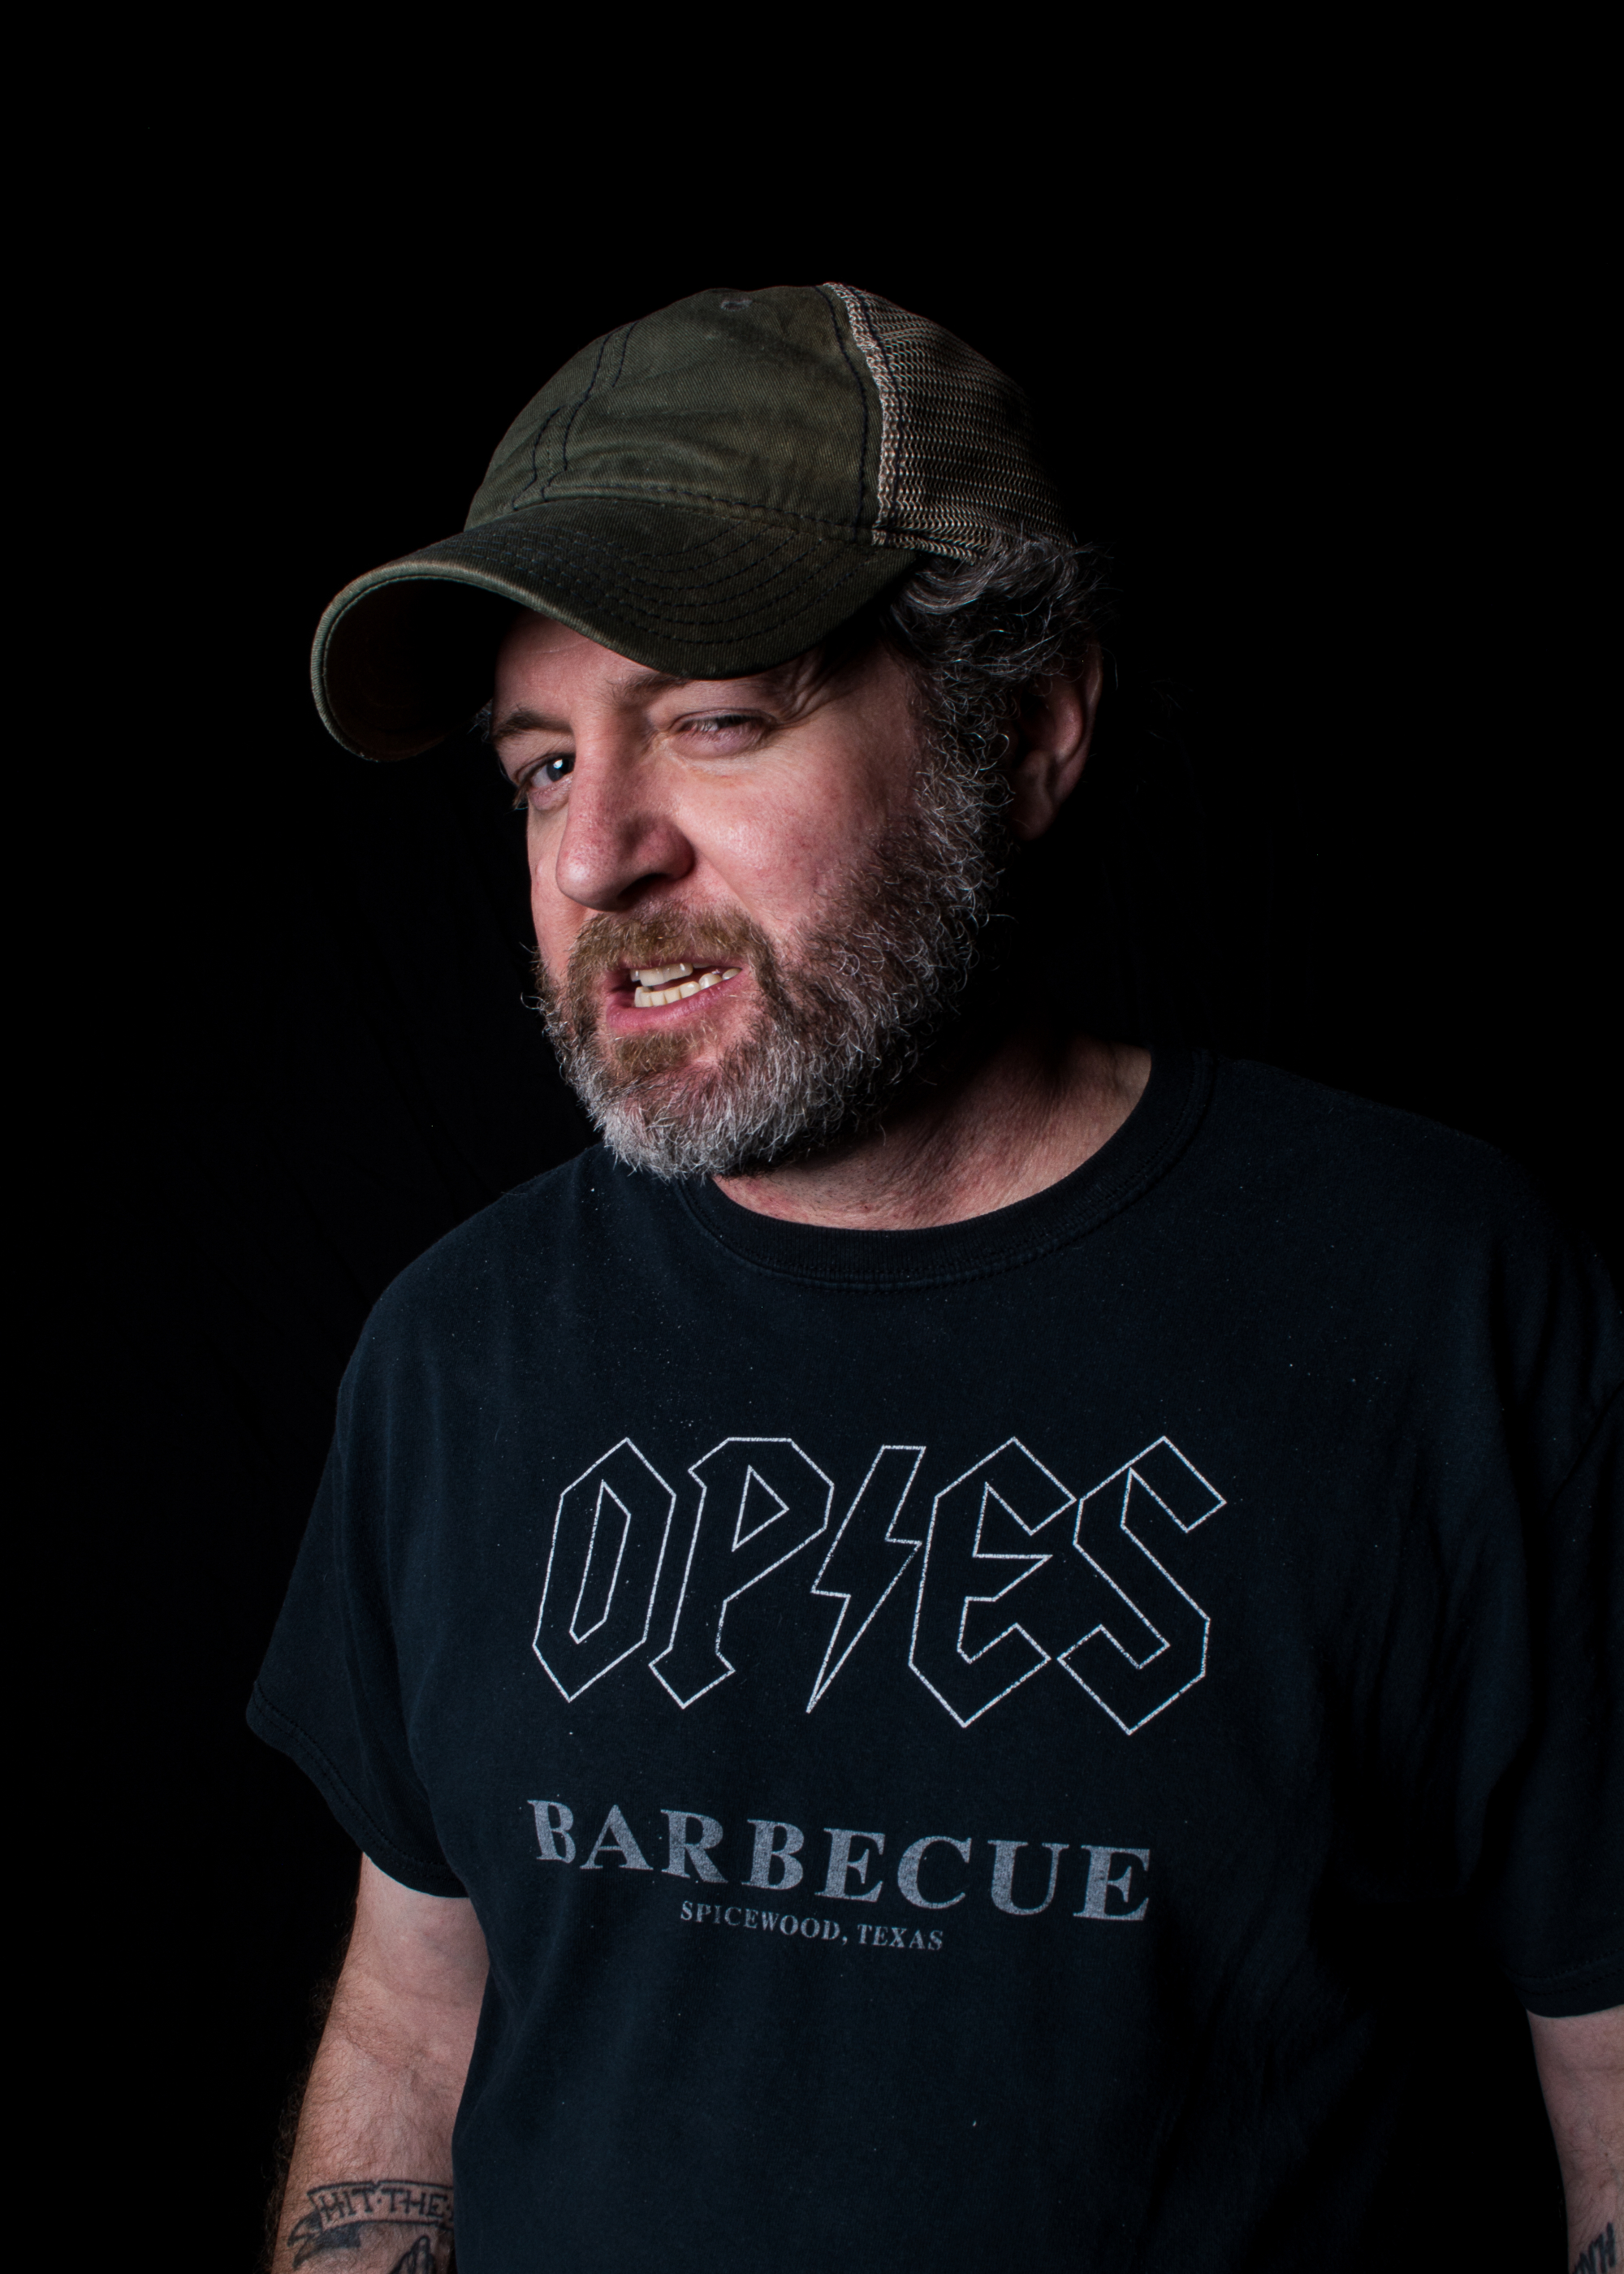 Scott H. Biram returns to Europe and after many years includes UK and Scandinavian dates